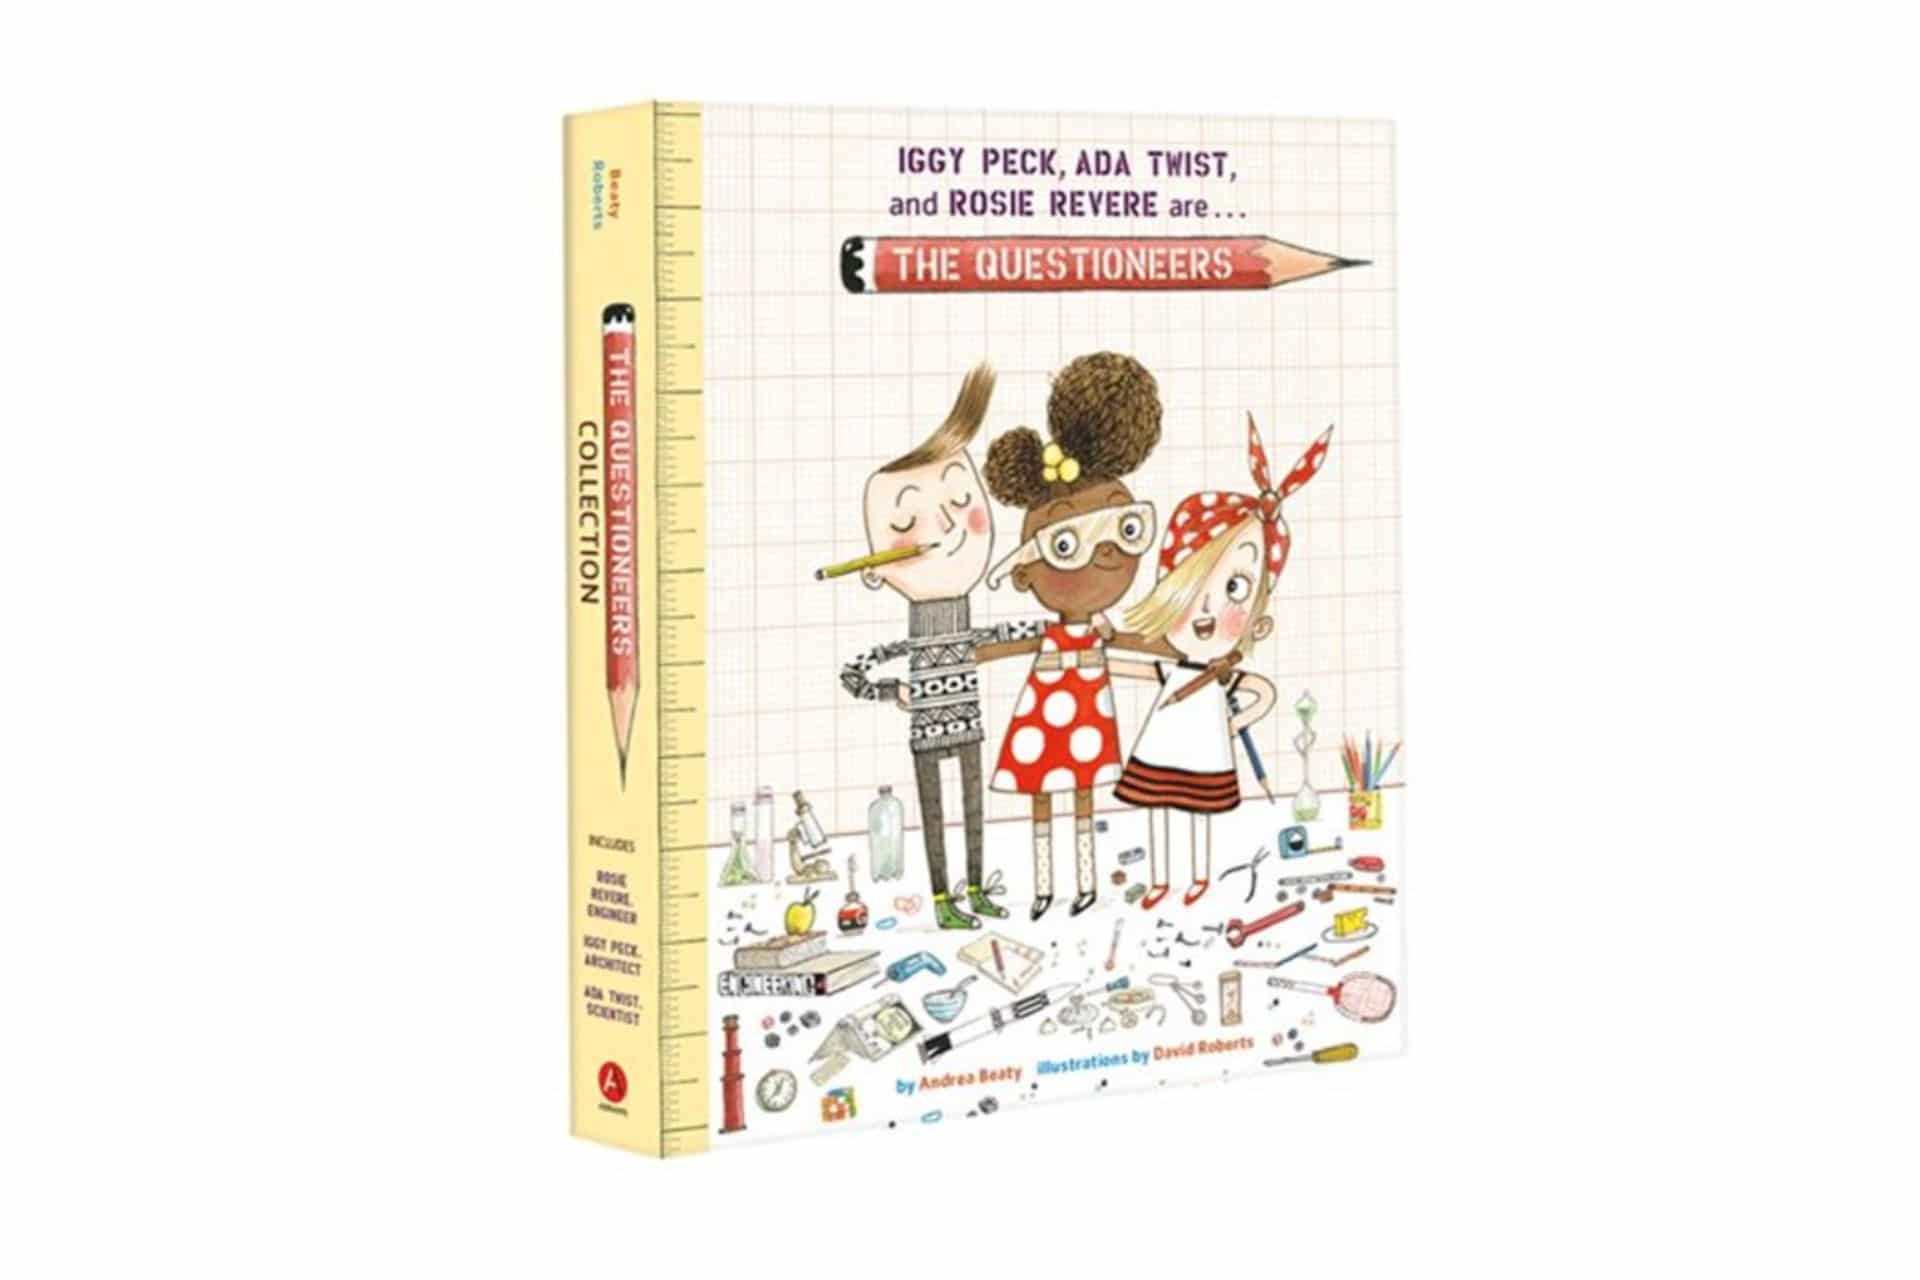 The Questioneers Collection Of Books - Parents Canada